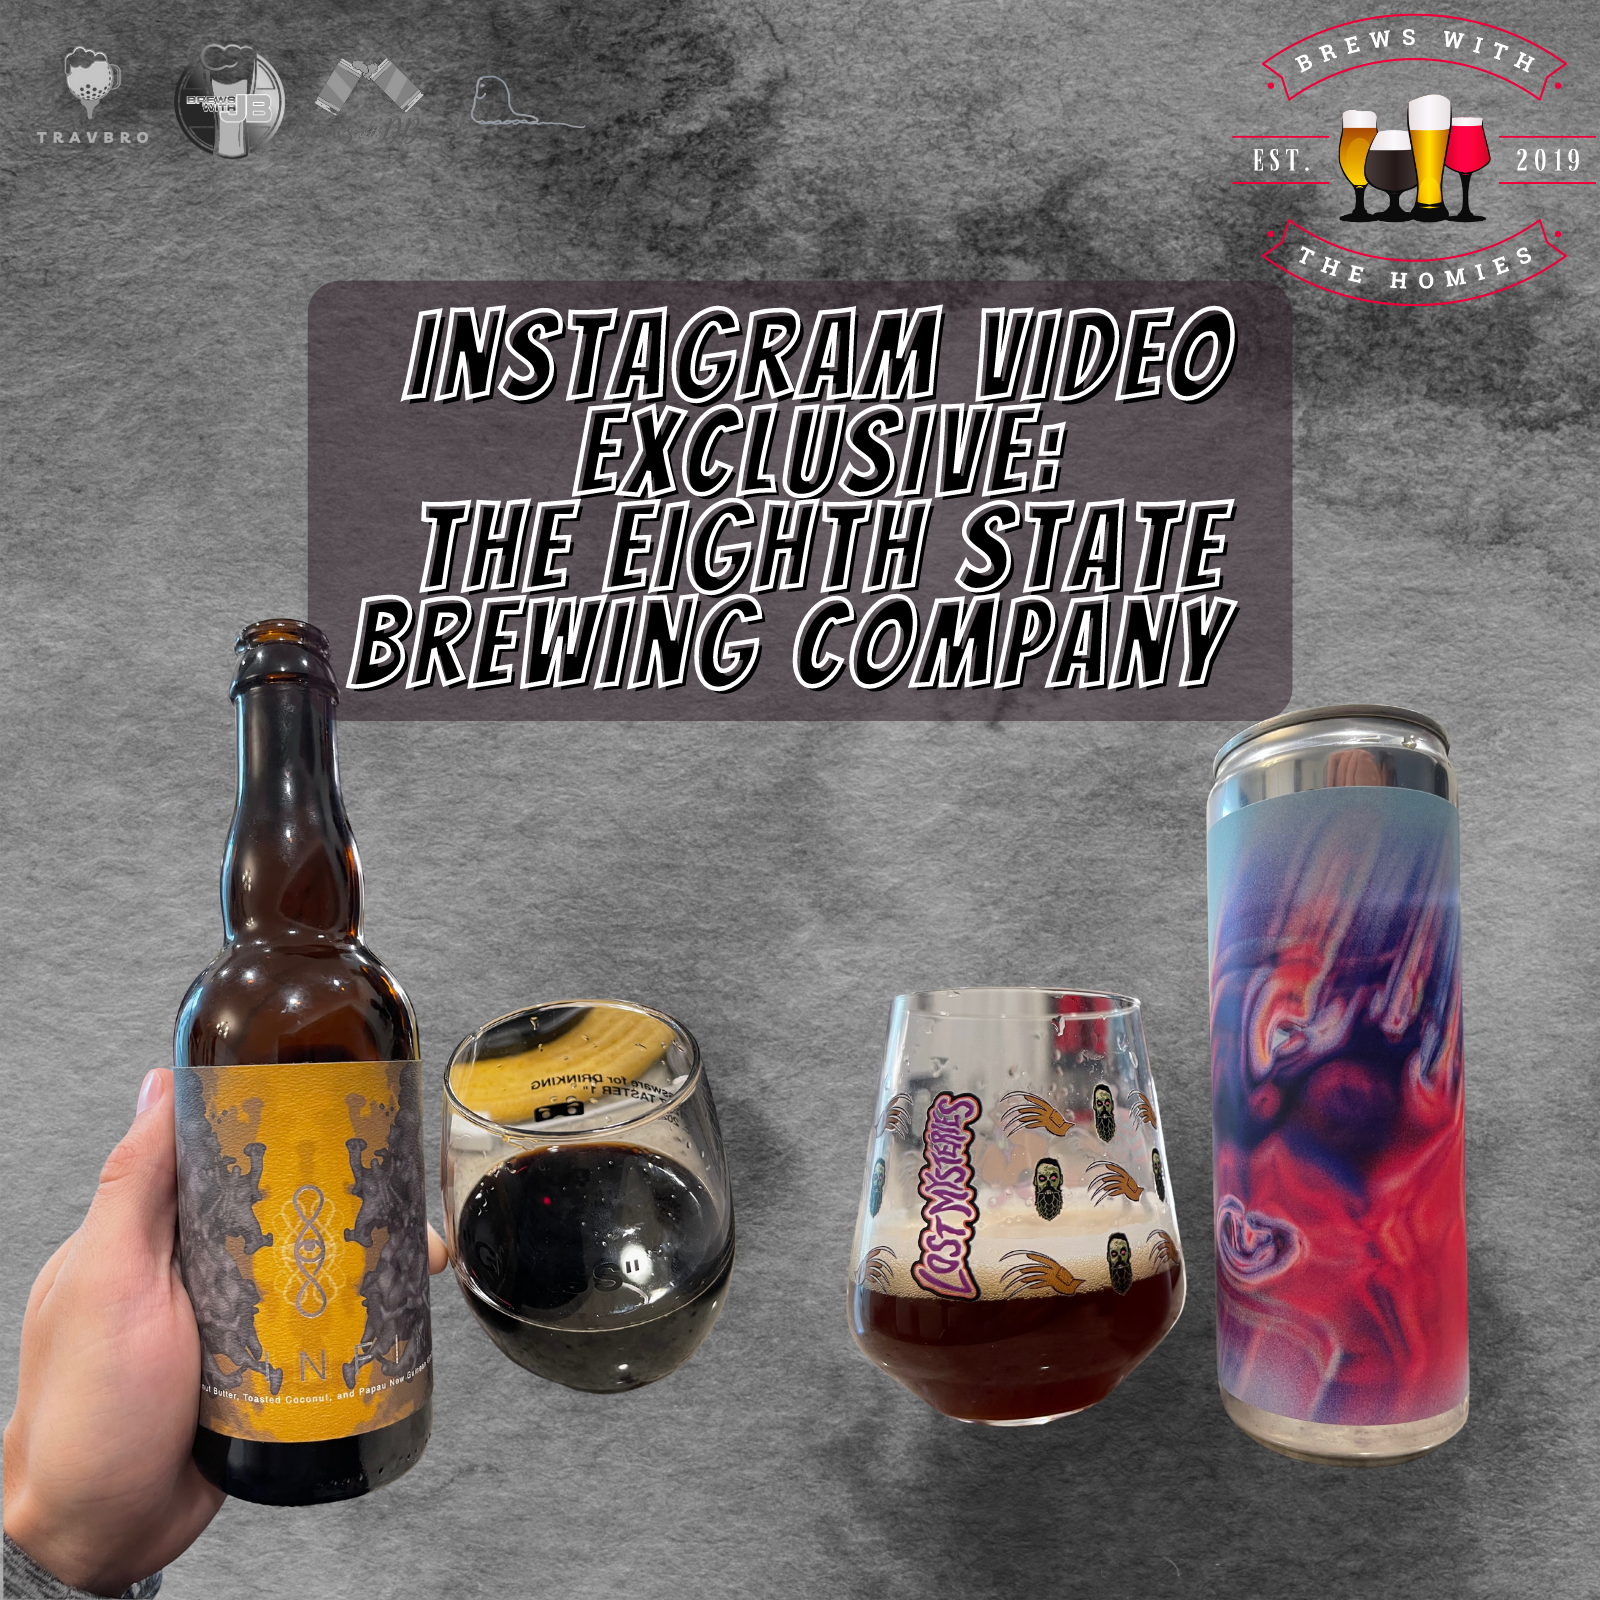 Instagram Video exclusive: The Eighth State Brewing Company